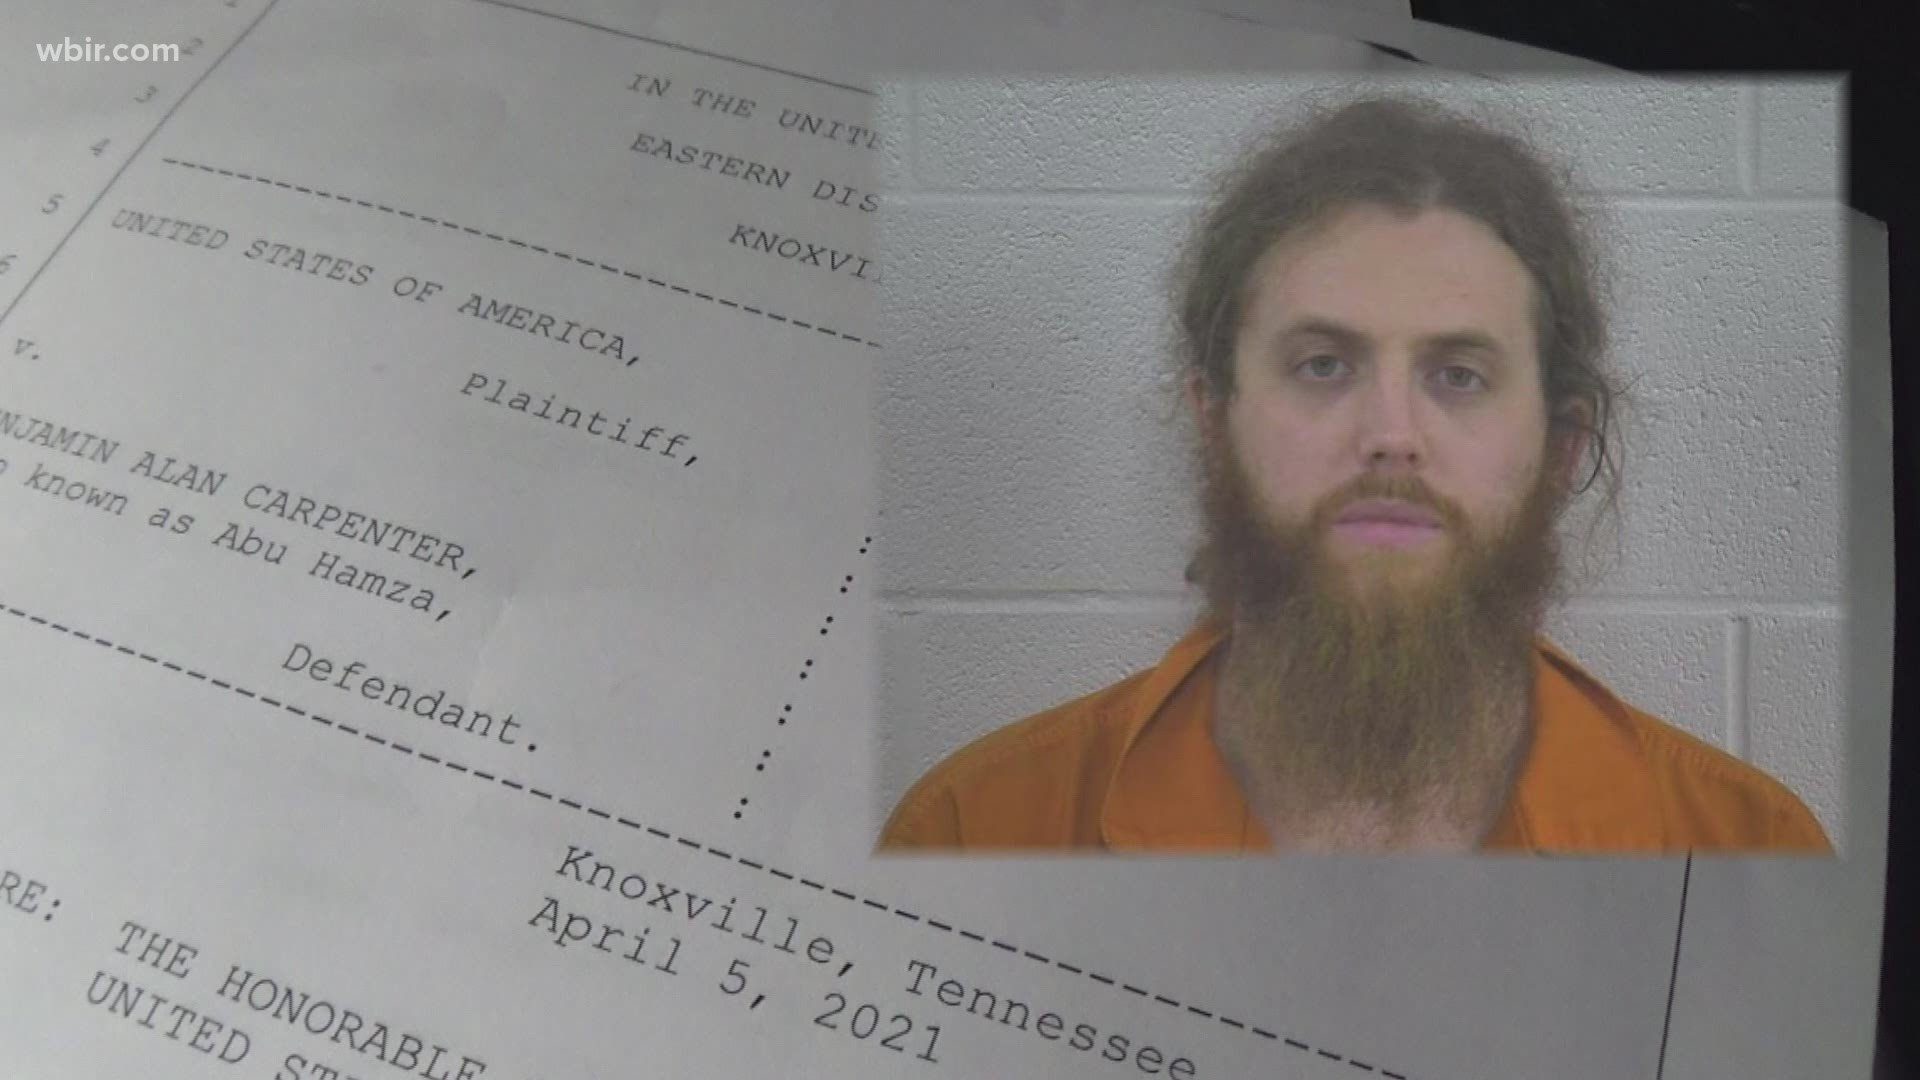 The Knoxville man accused of trying to help ISIS terrorists could use a part of the Bill of Rights as a criminal defense strategy.